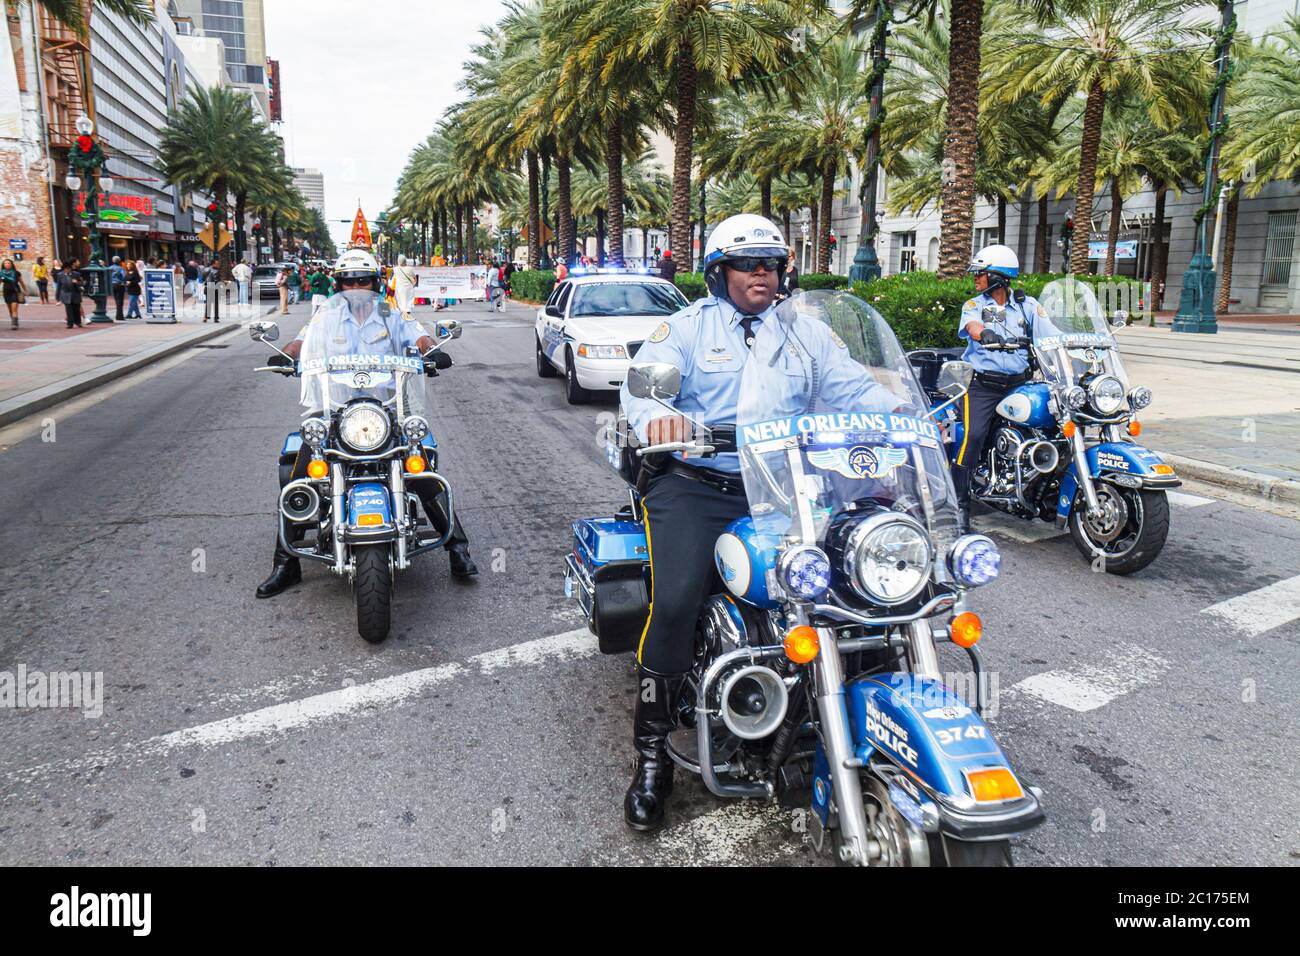 New Orleans Louisiana,downtown,Canal Street,Festival of India,Hare Krishna,Hinduism,religion,parade,police,motorcycle escort,Black man men male adult Stock Photo